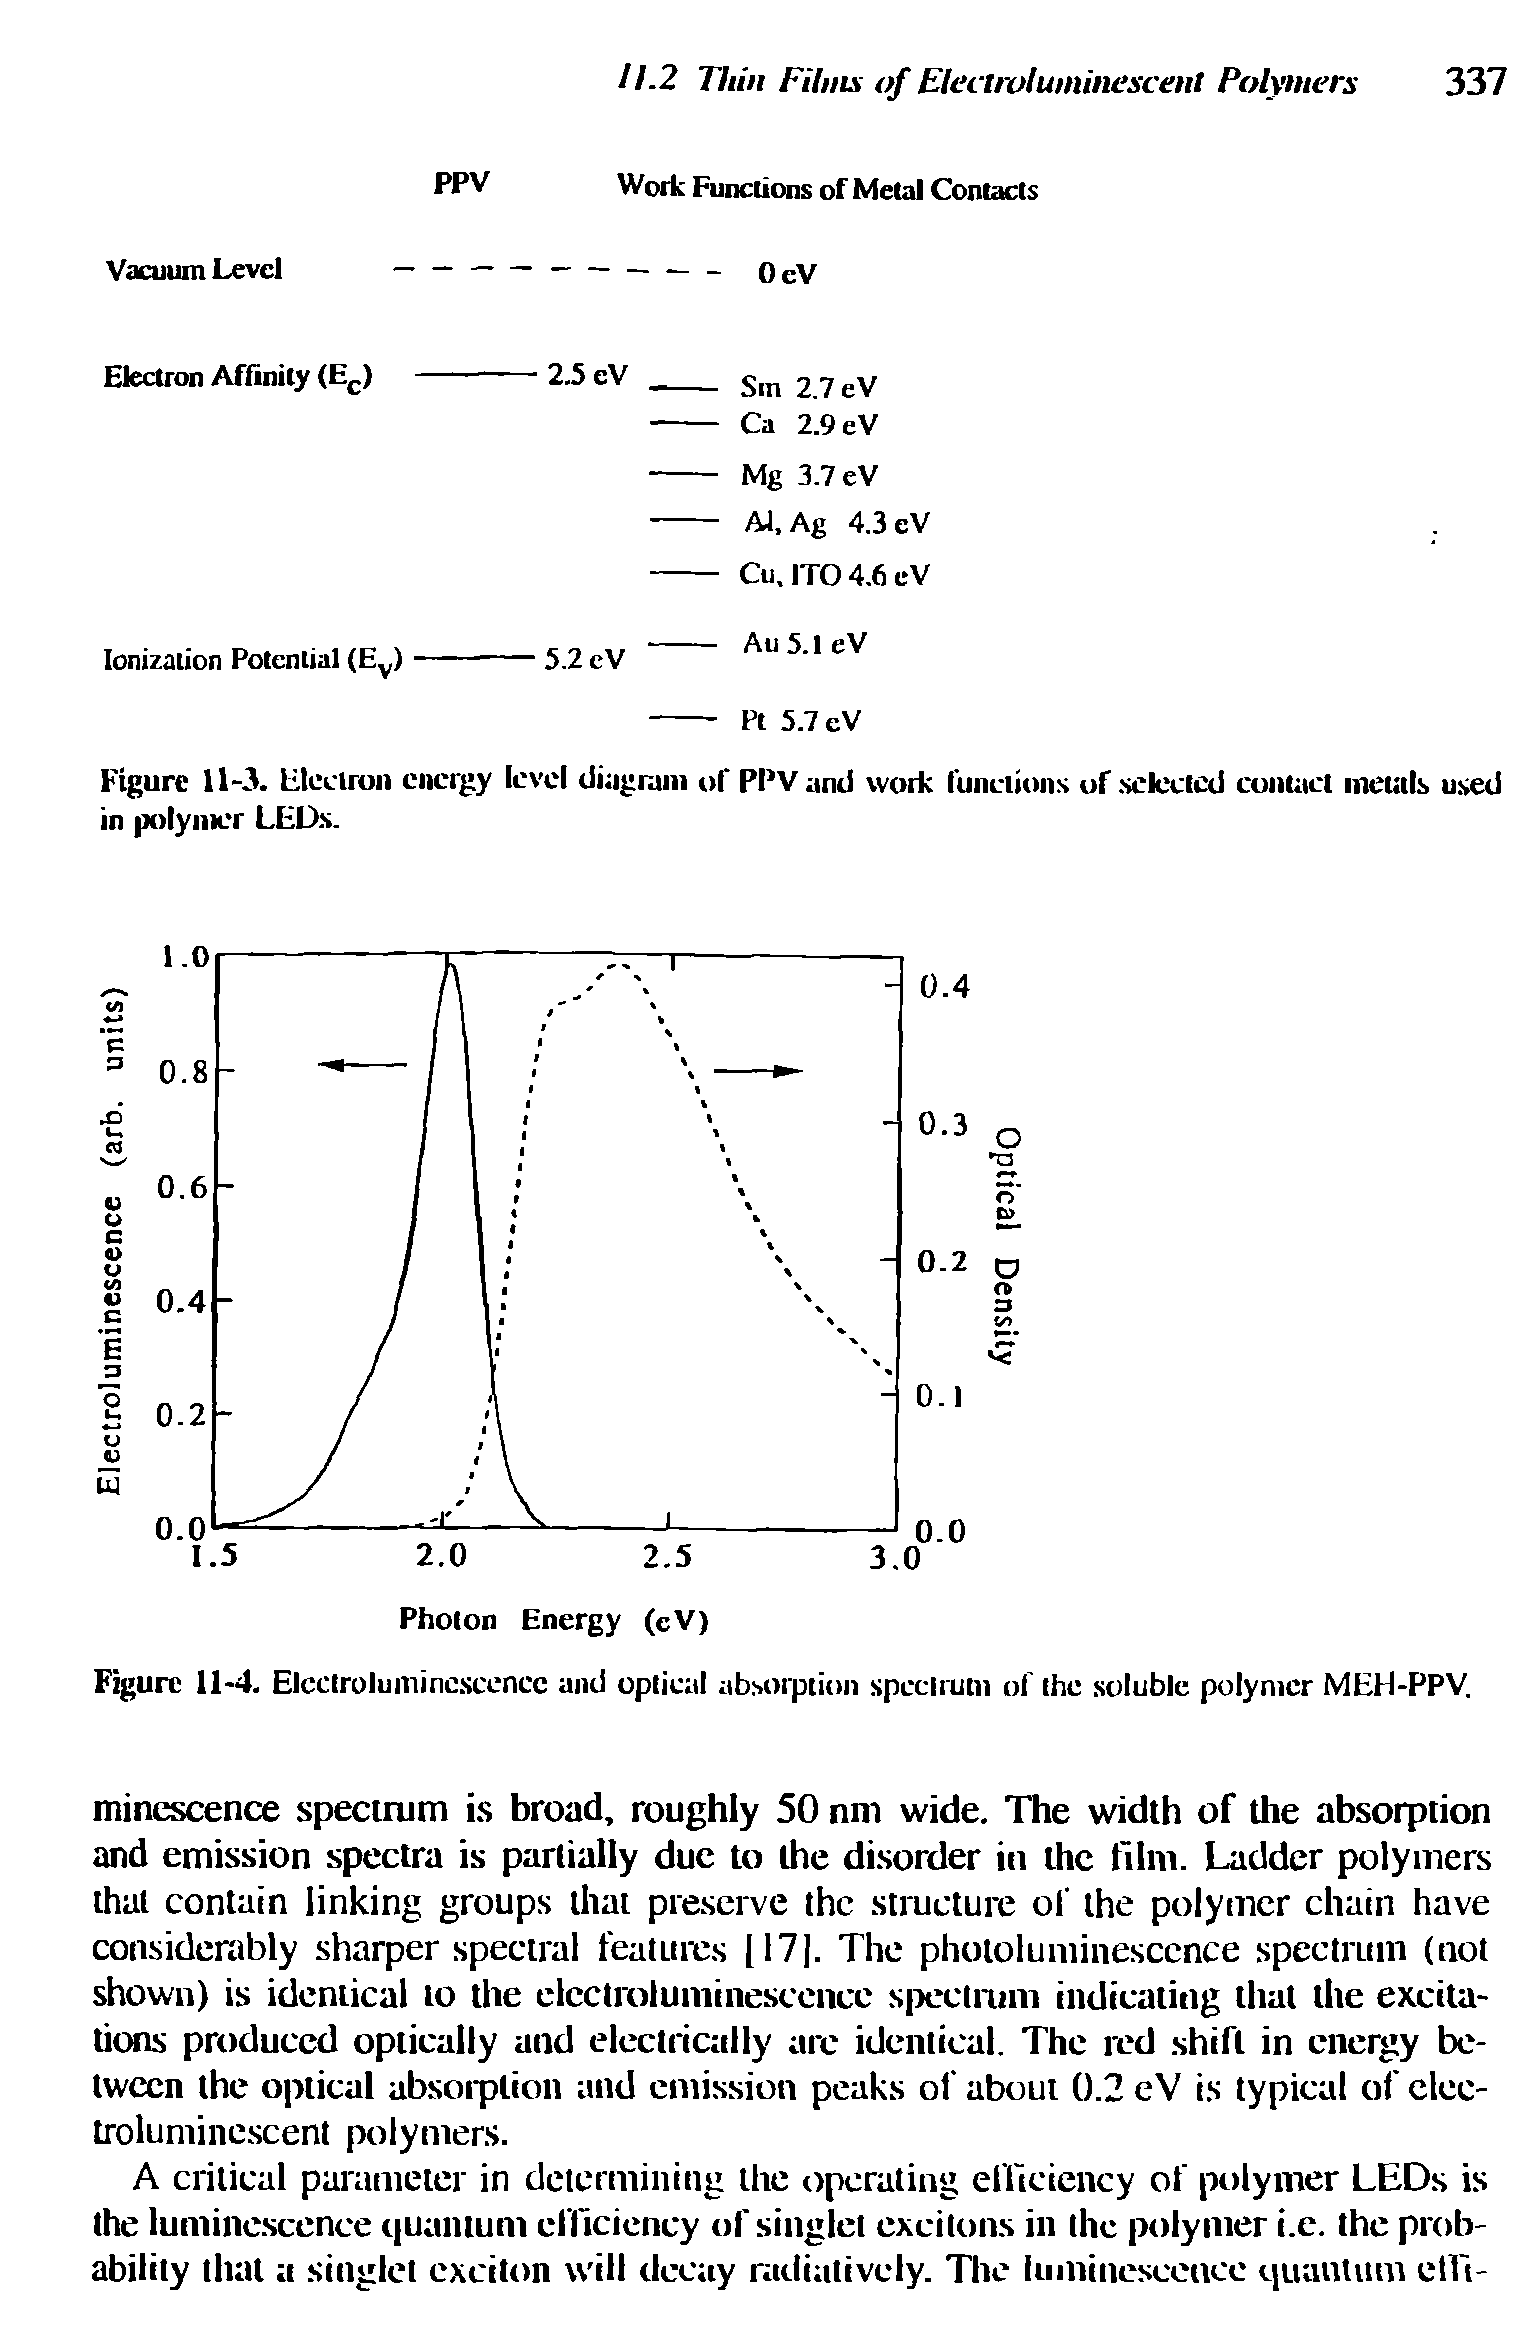 Figure 11-4. Electroluminescence and optical absorption spectrum of the soluble polymer MEH-PPV.